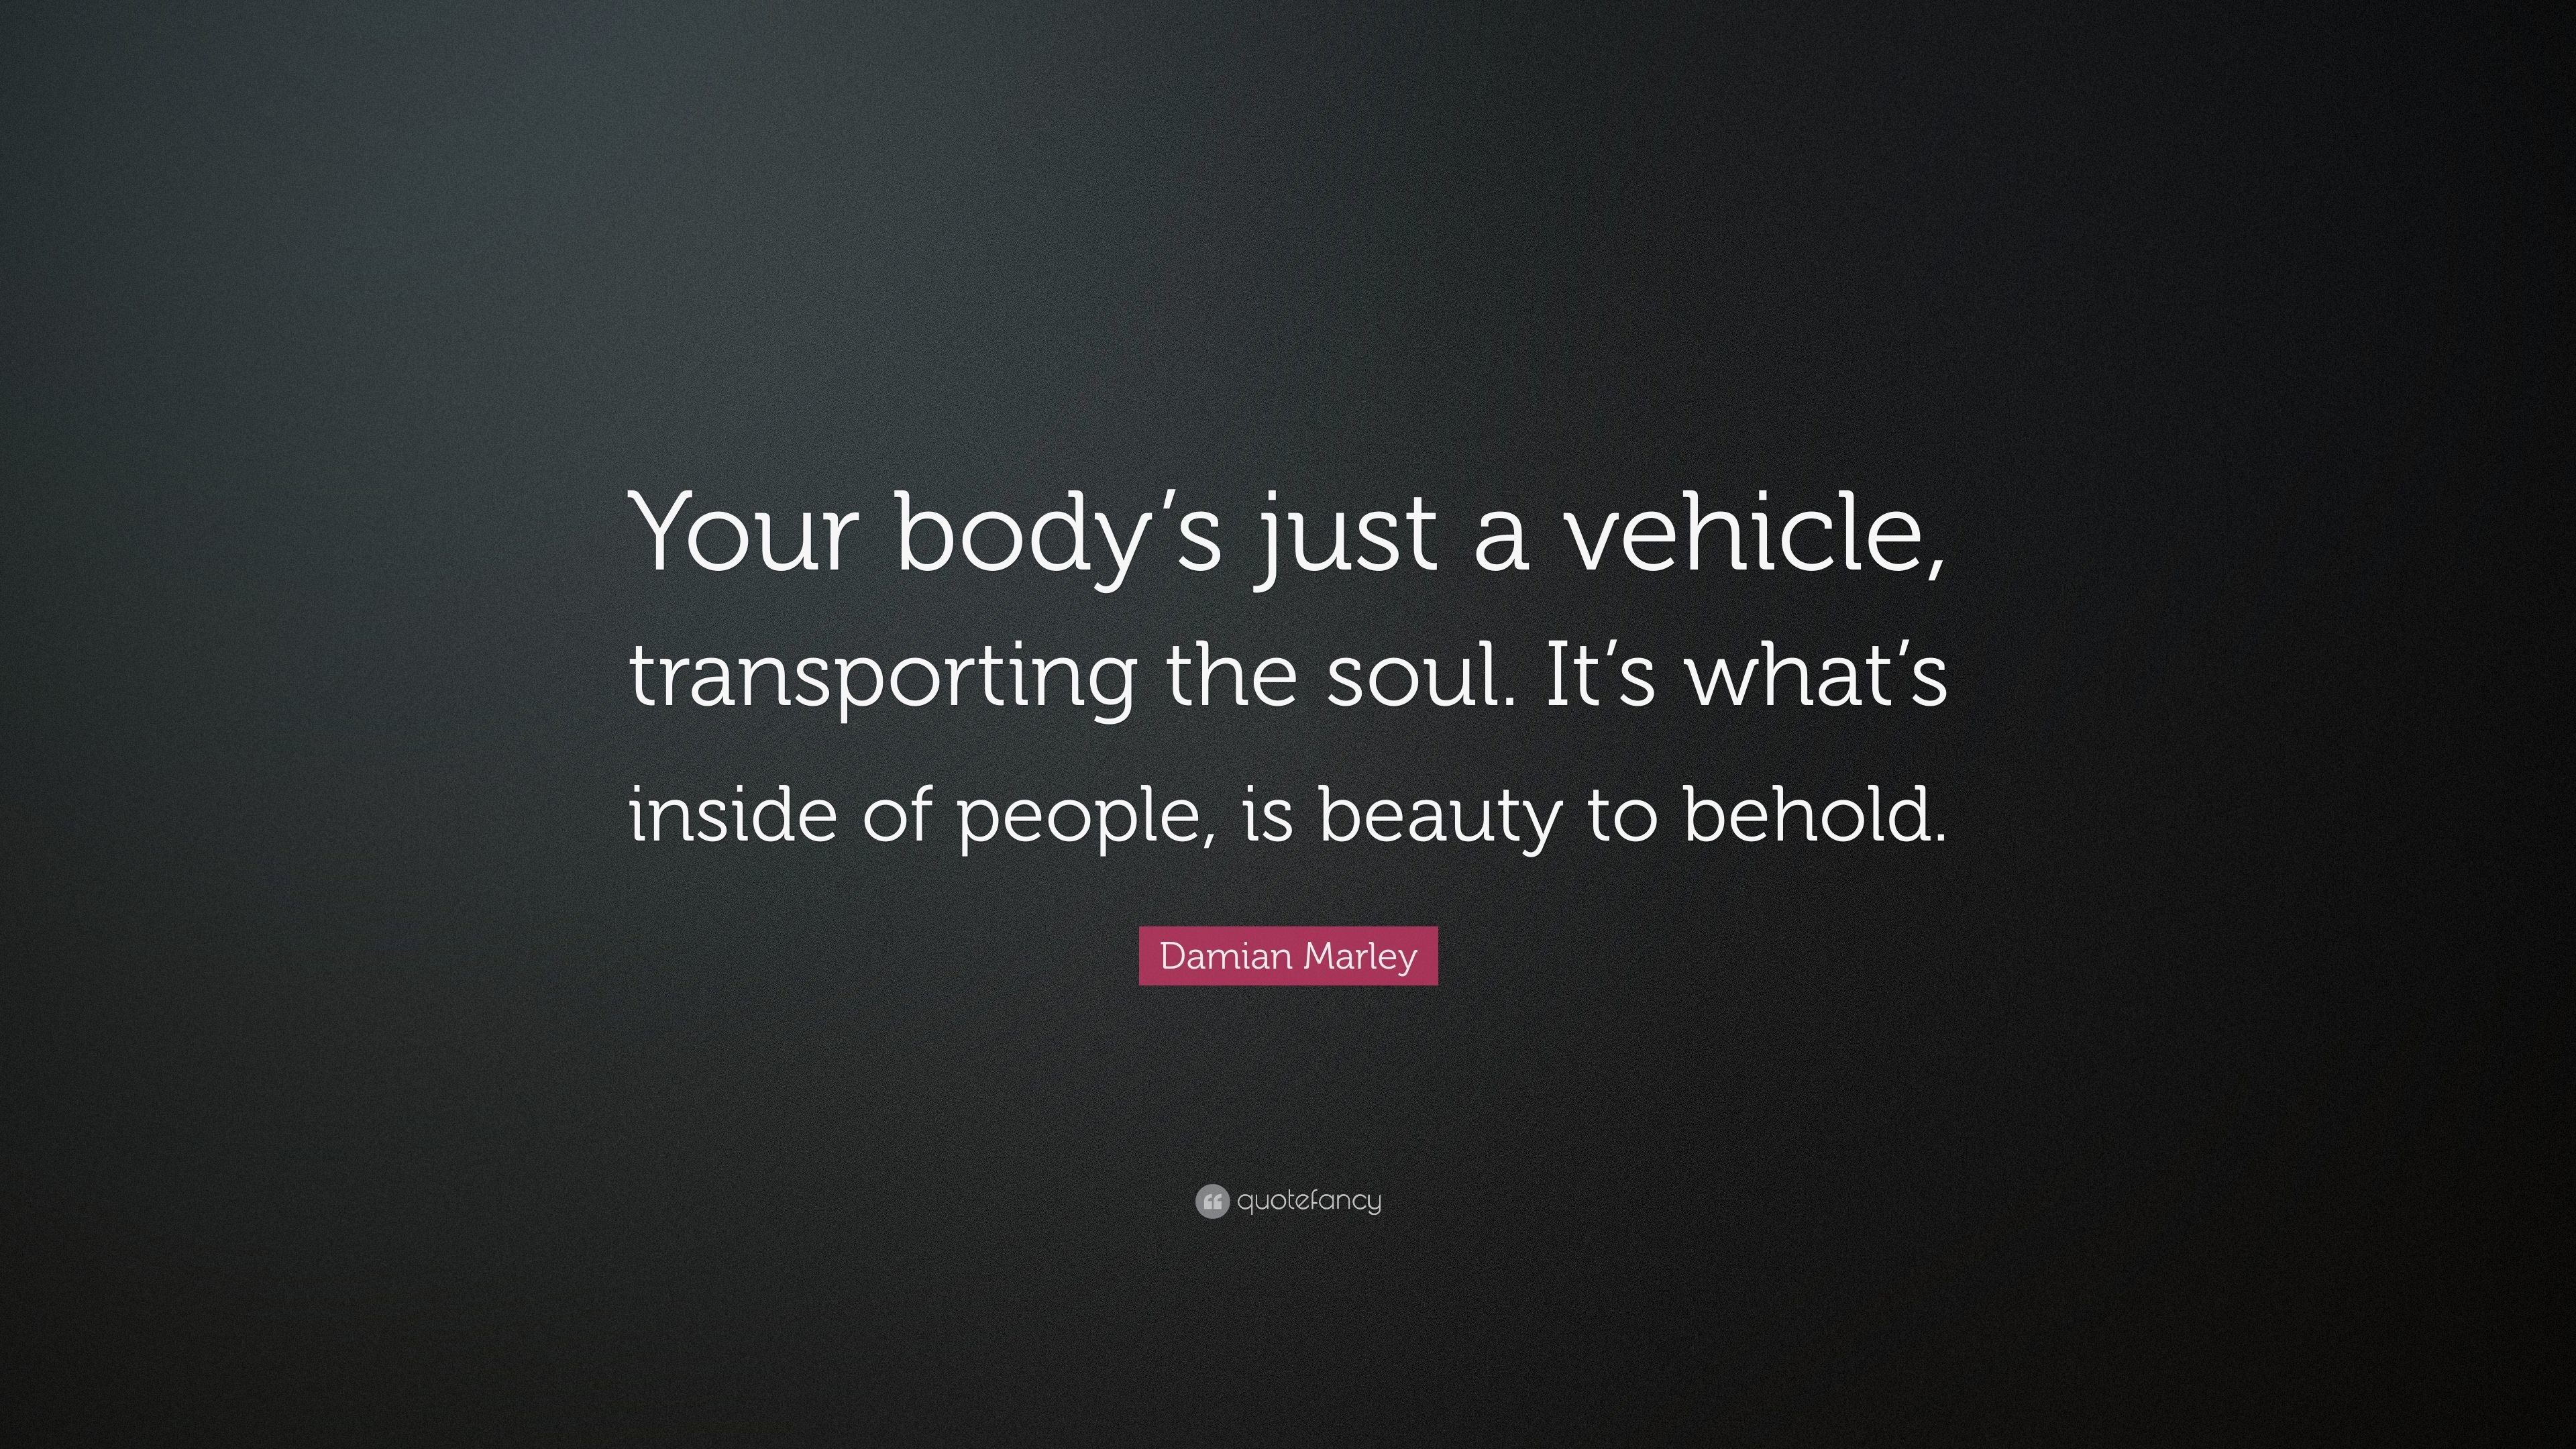 3840x2160 Damian Marley Quote: “Your body's just a vehicle, transporting the soul.  It's